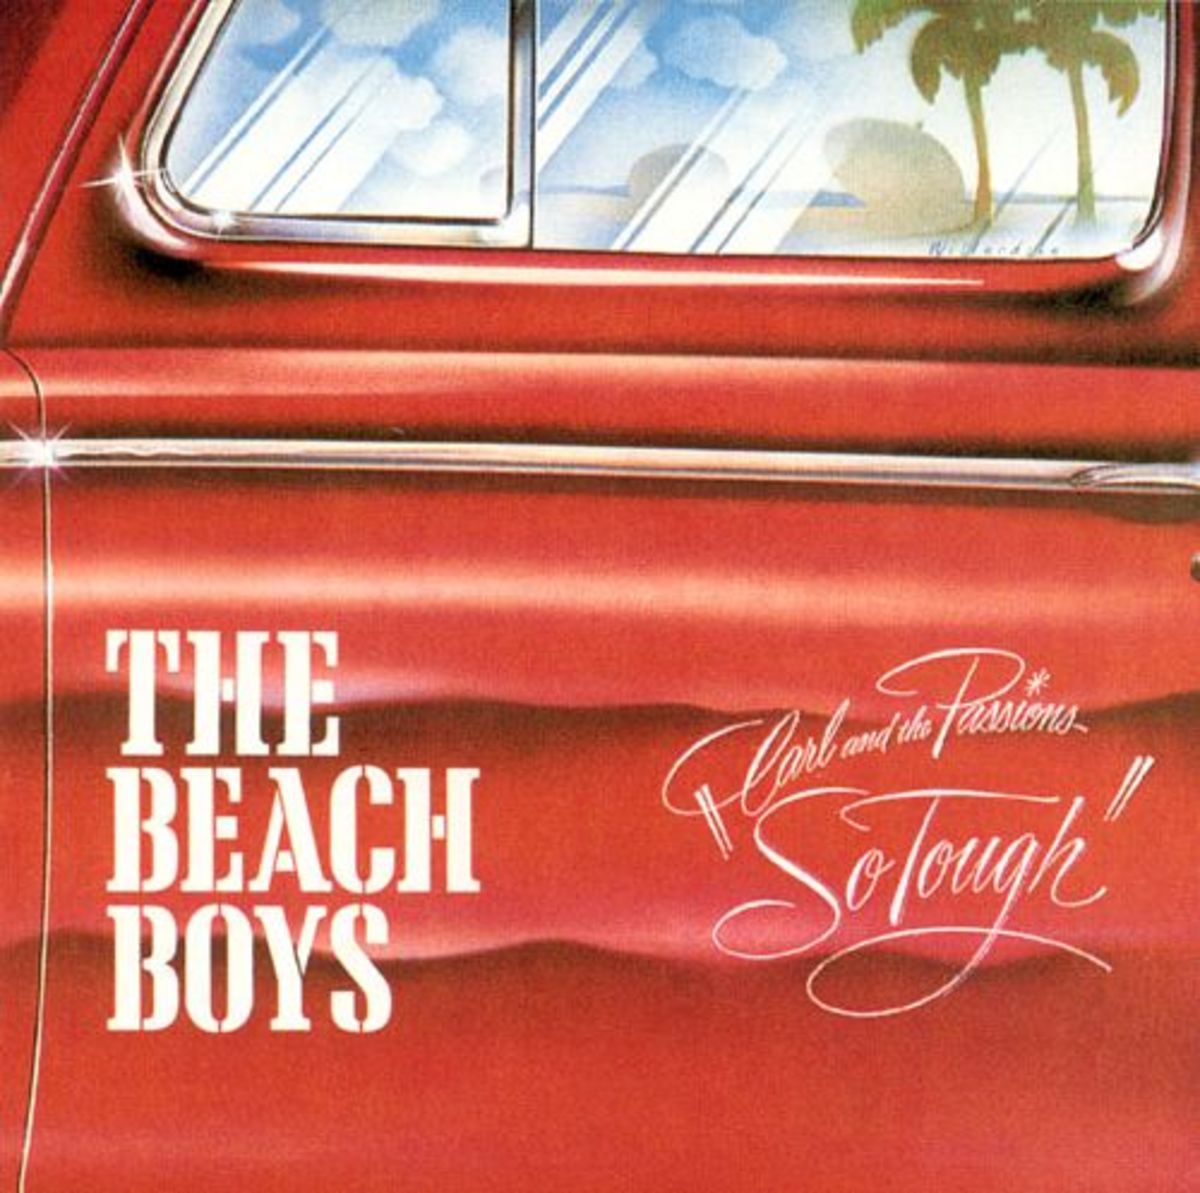 The Beach Boys, "Carl and the Passions: 'So Tough'"